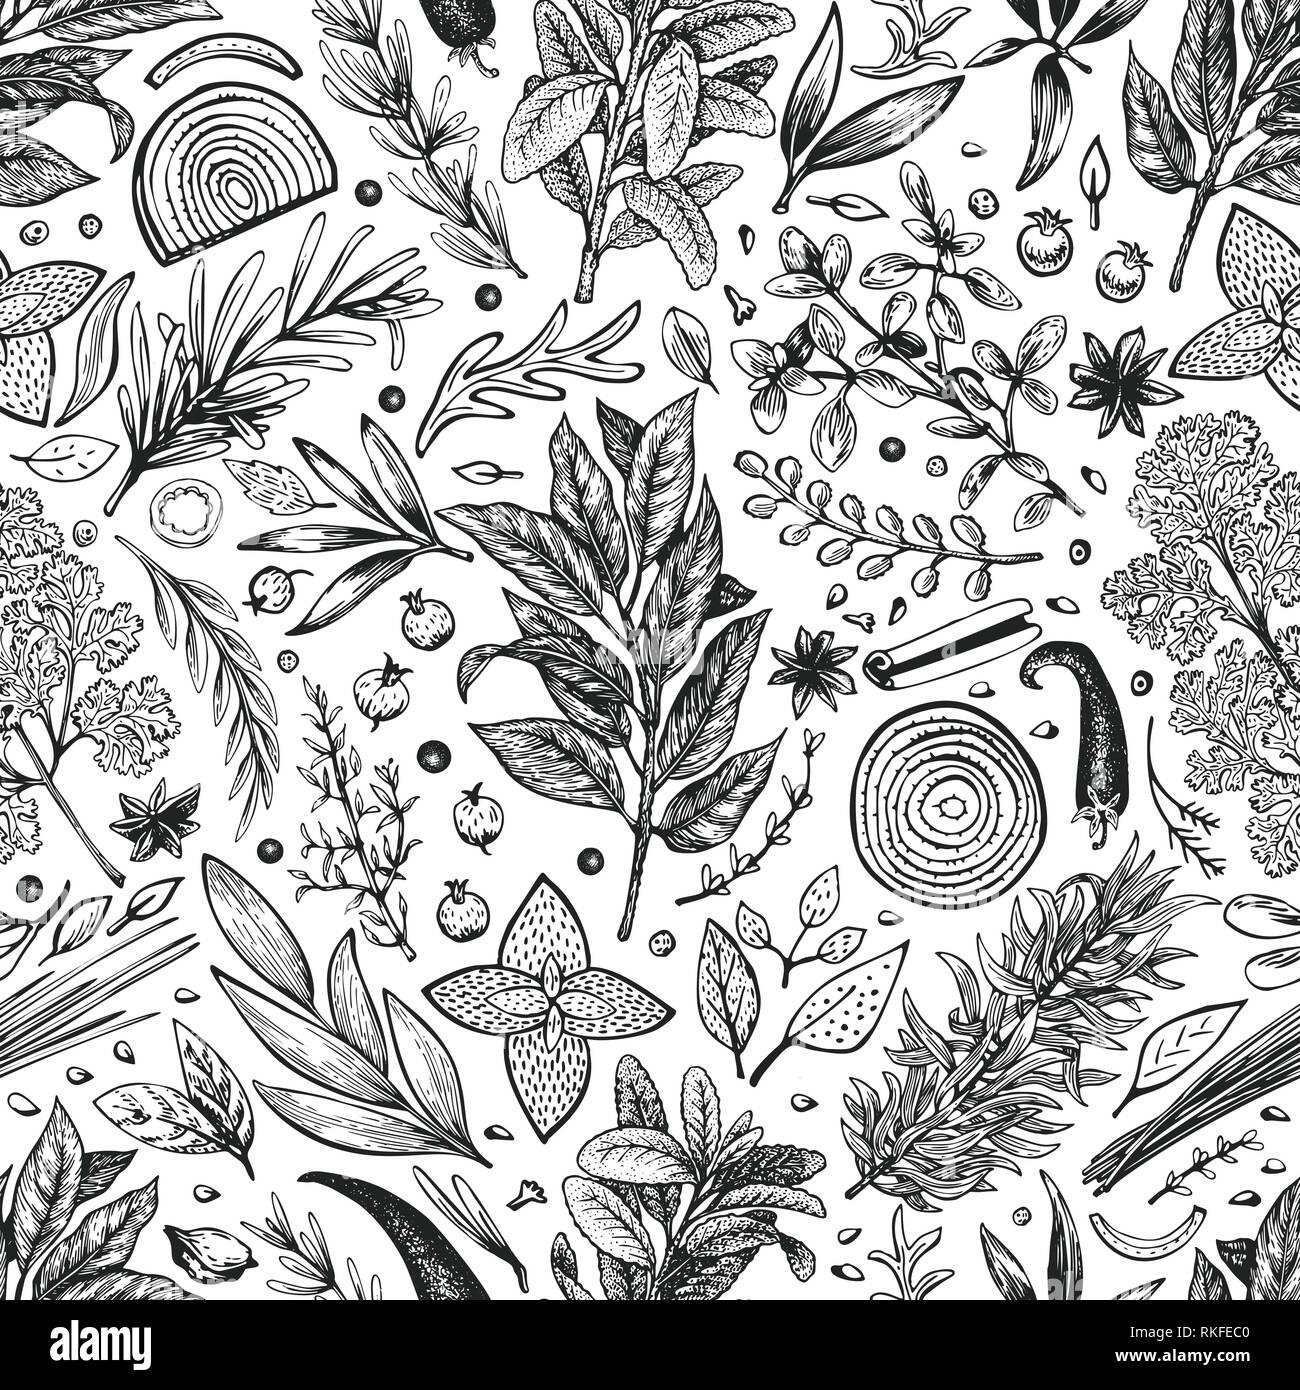 Culinary herbs and spices seamless pattern. Vector background for design menu, packaging, recipes, label, farm market products. Hand drawn vintage botanical illustration. Stock Vector